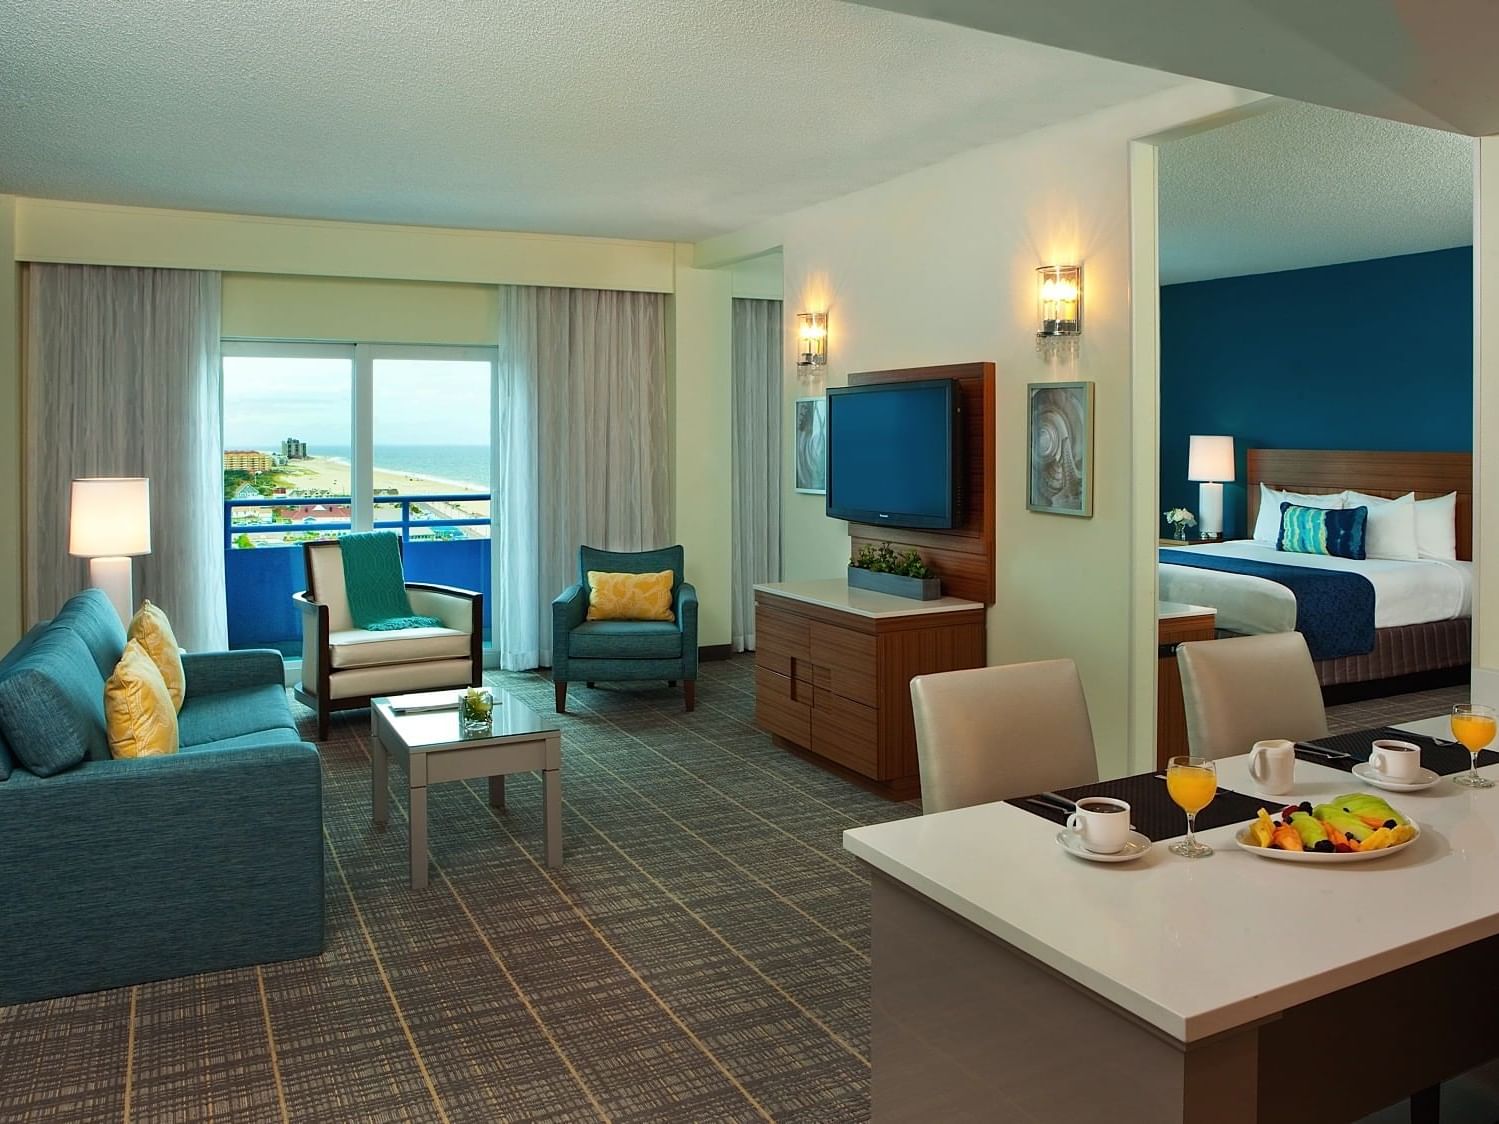 Living & dining area in Junior King Suite at Ocean Place